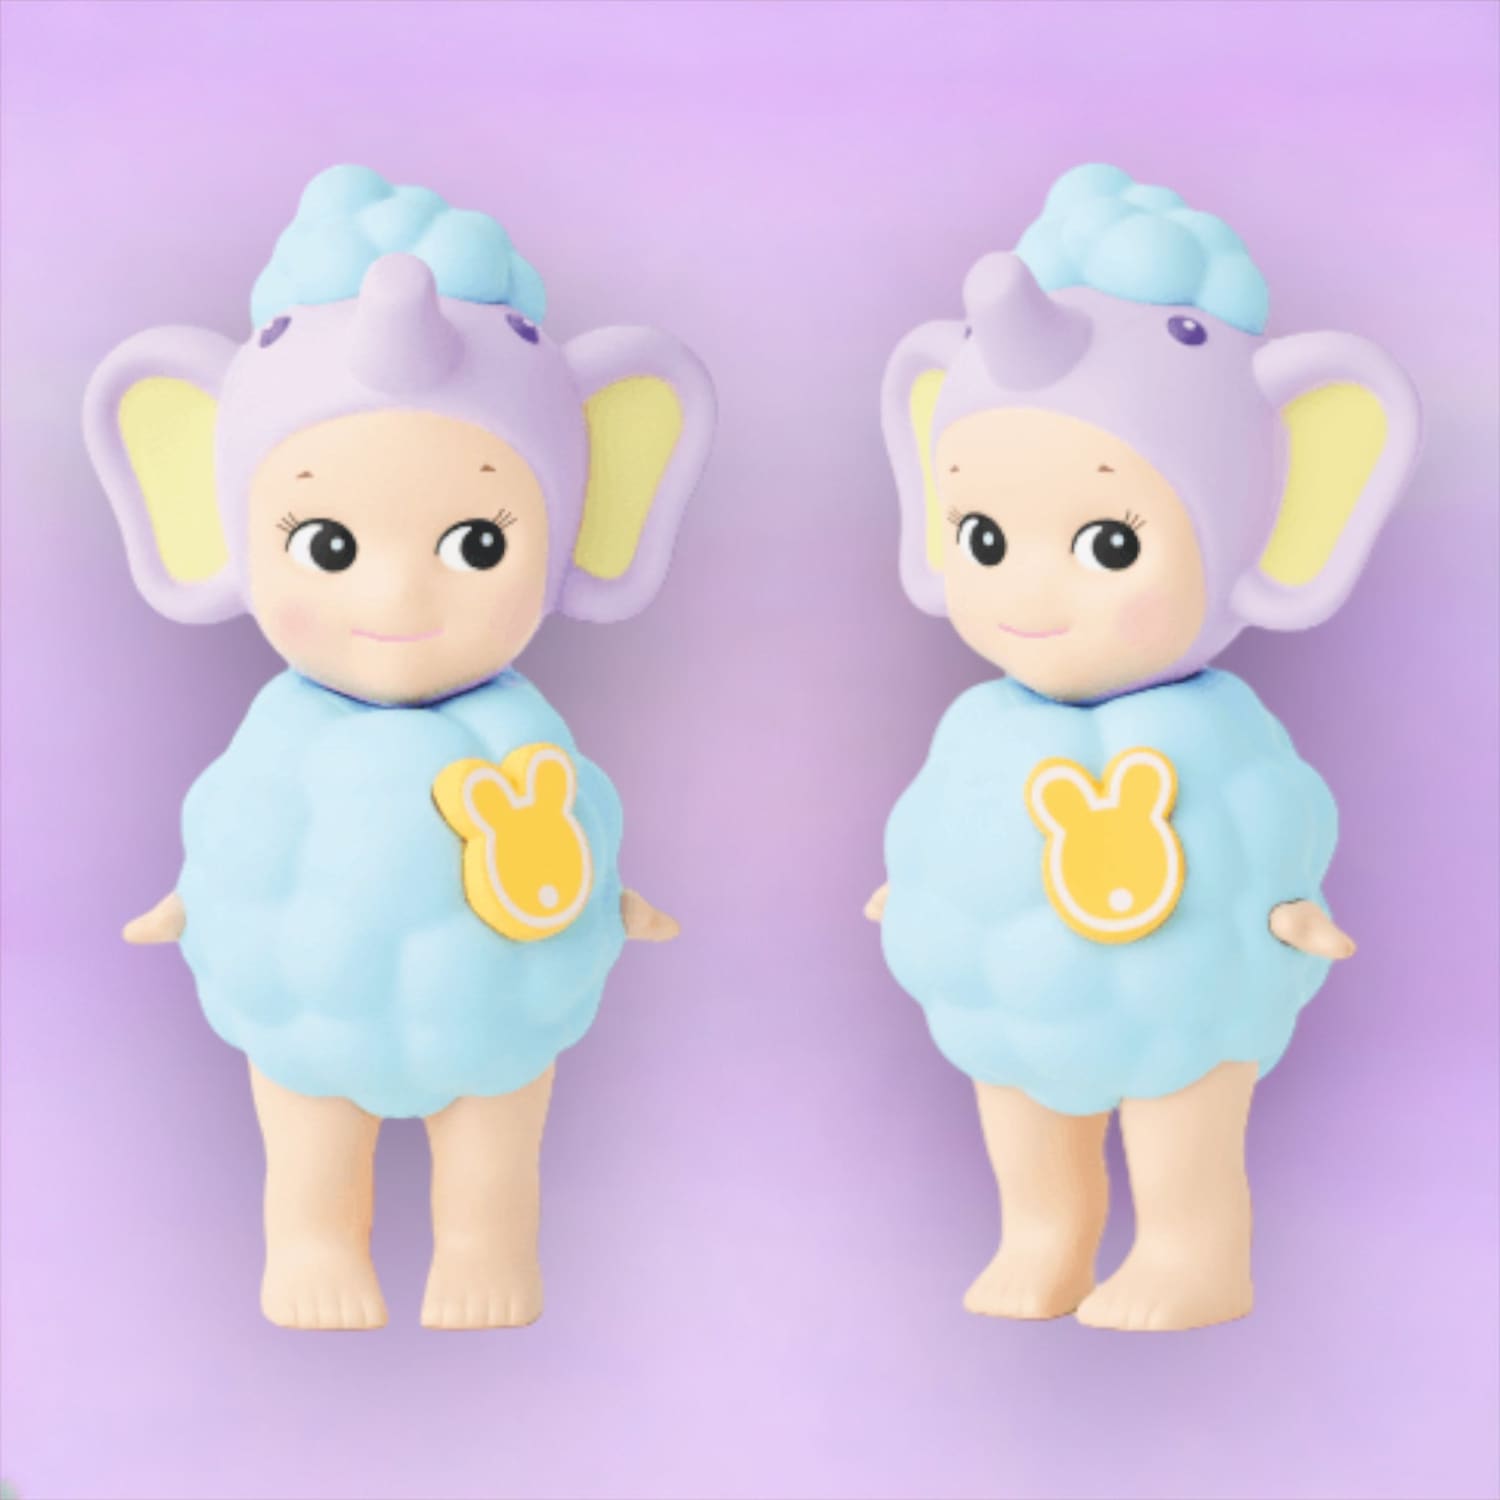 Sonny Angel - Web Limited Edition Home Sweet Blind Box